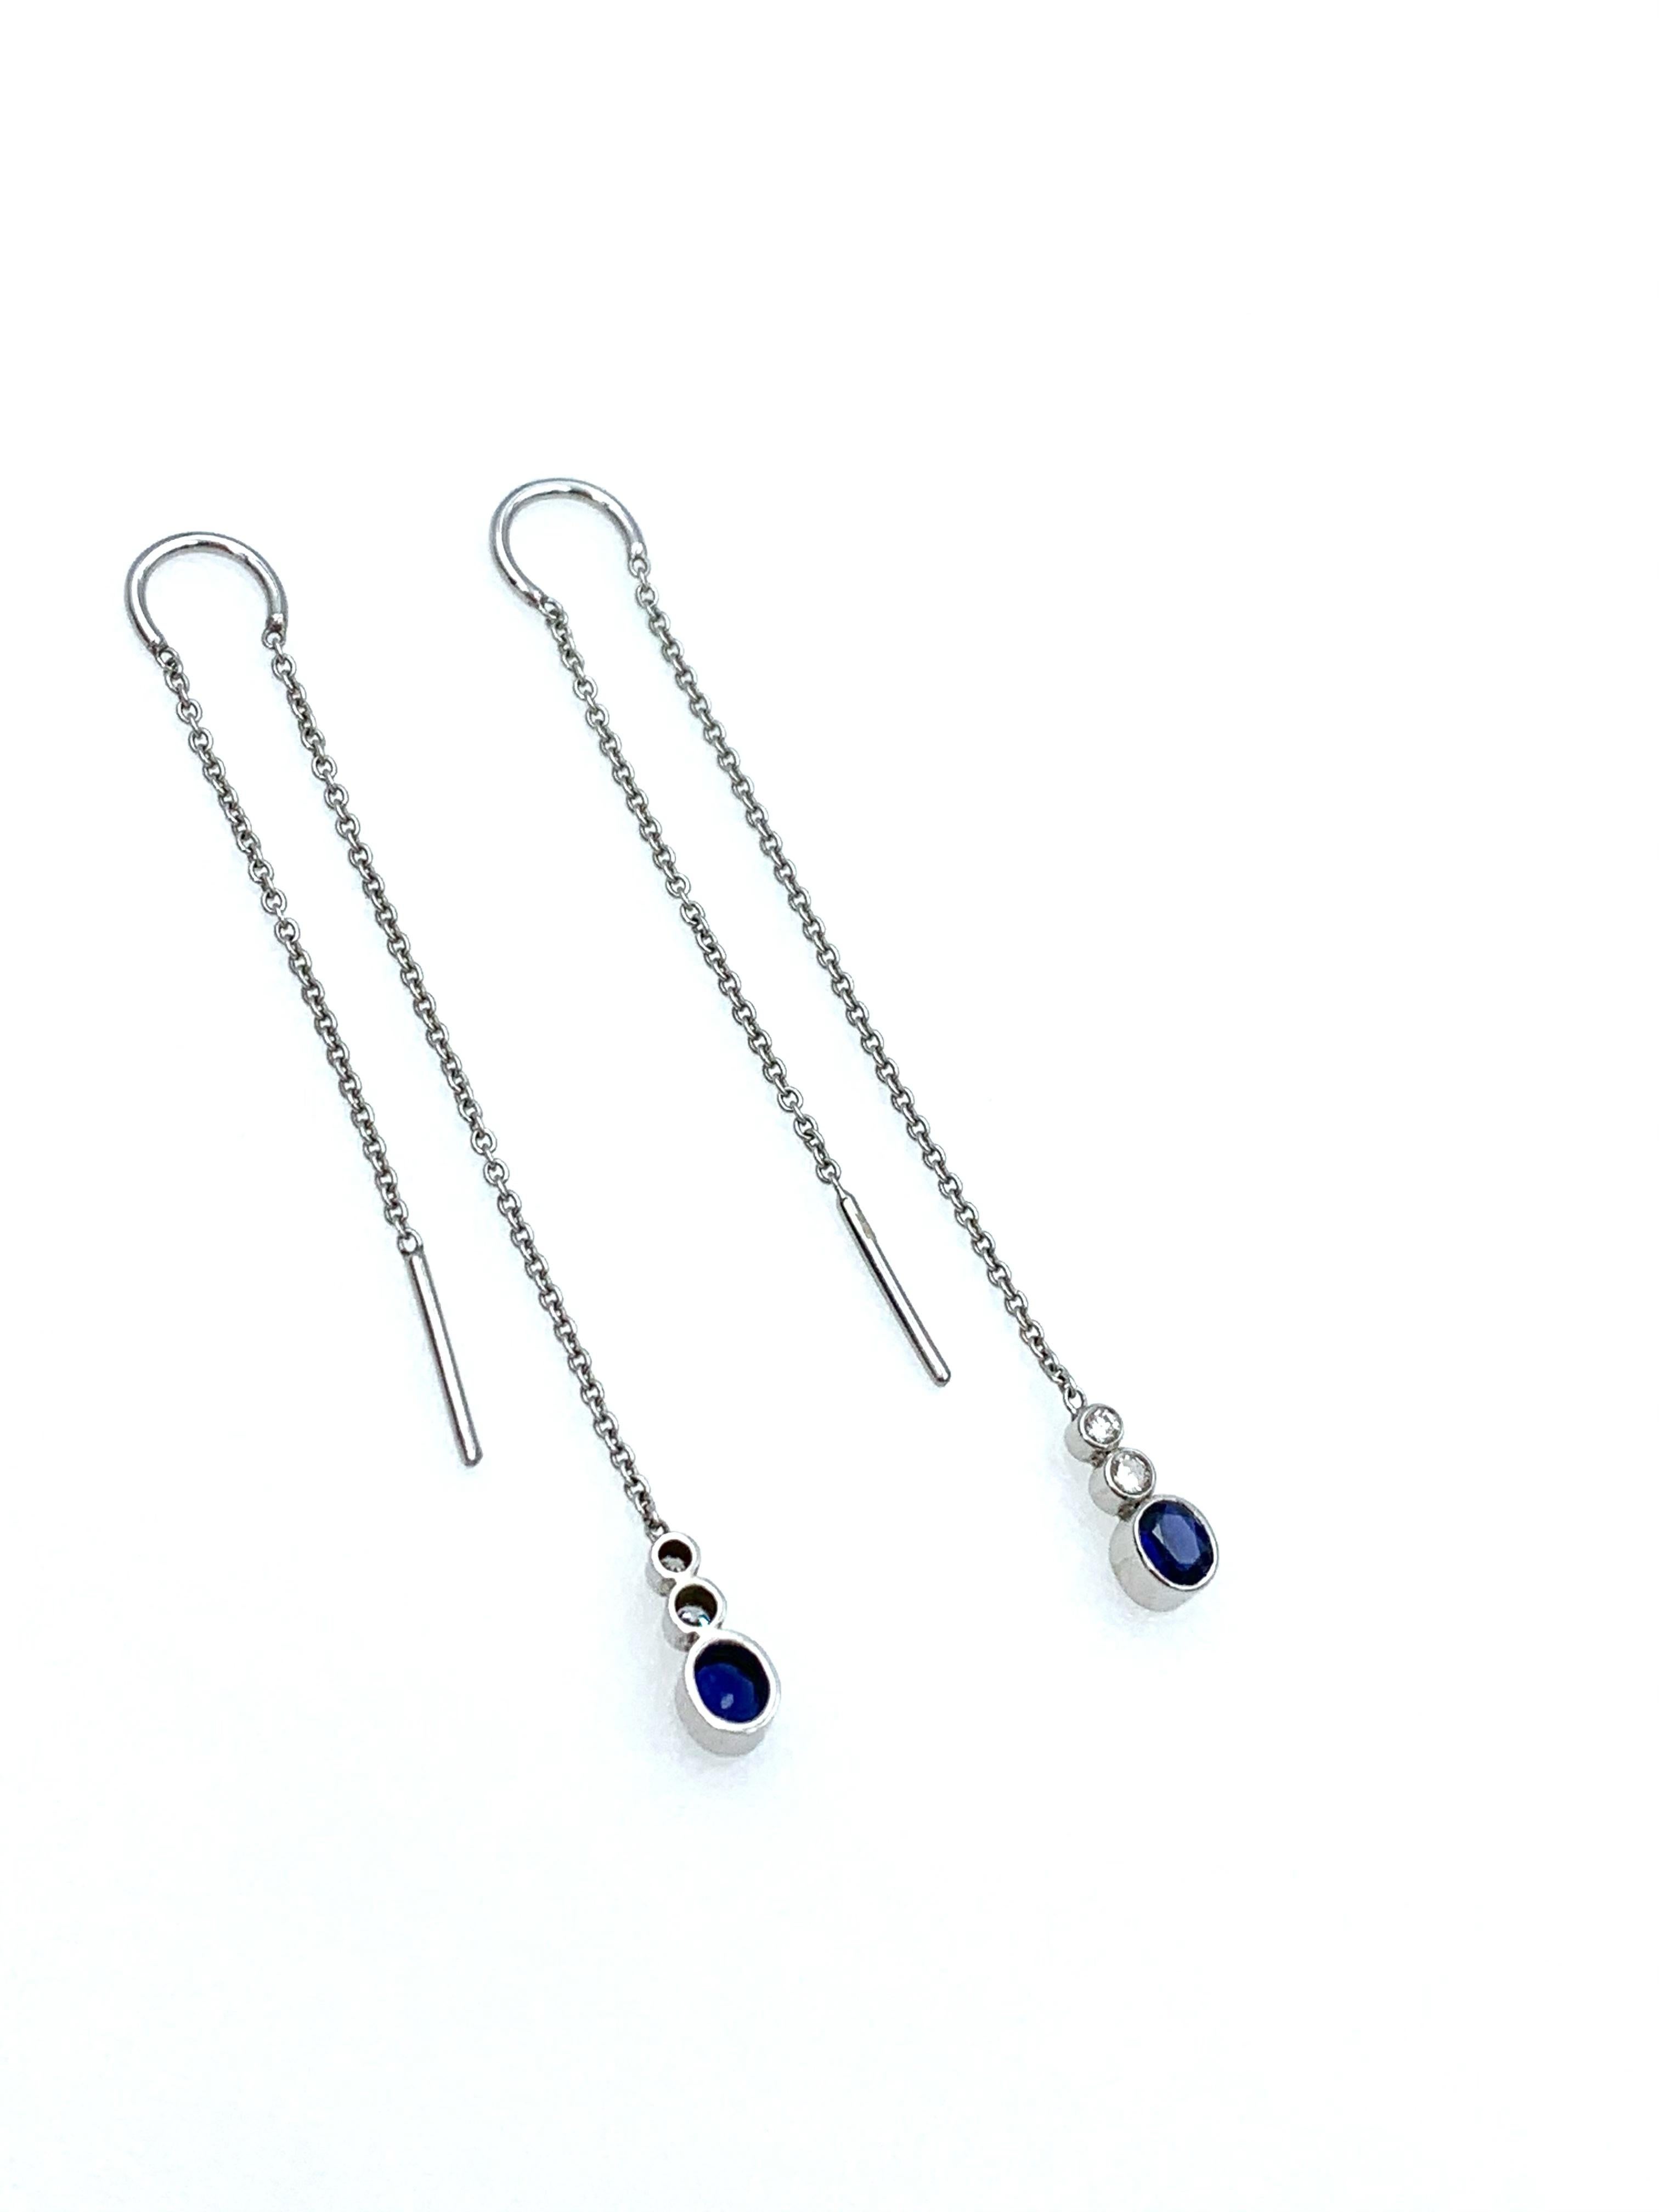 Contemporary White Gold Threadthrough Earrings in Blue Oval Sapphire and Diamonds